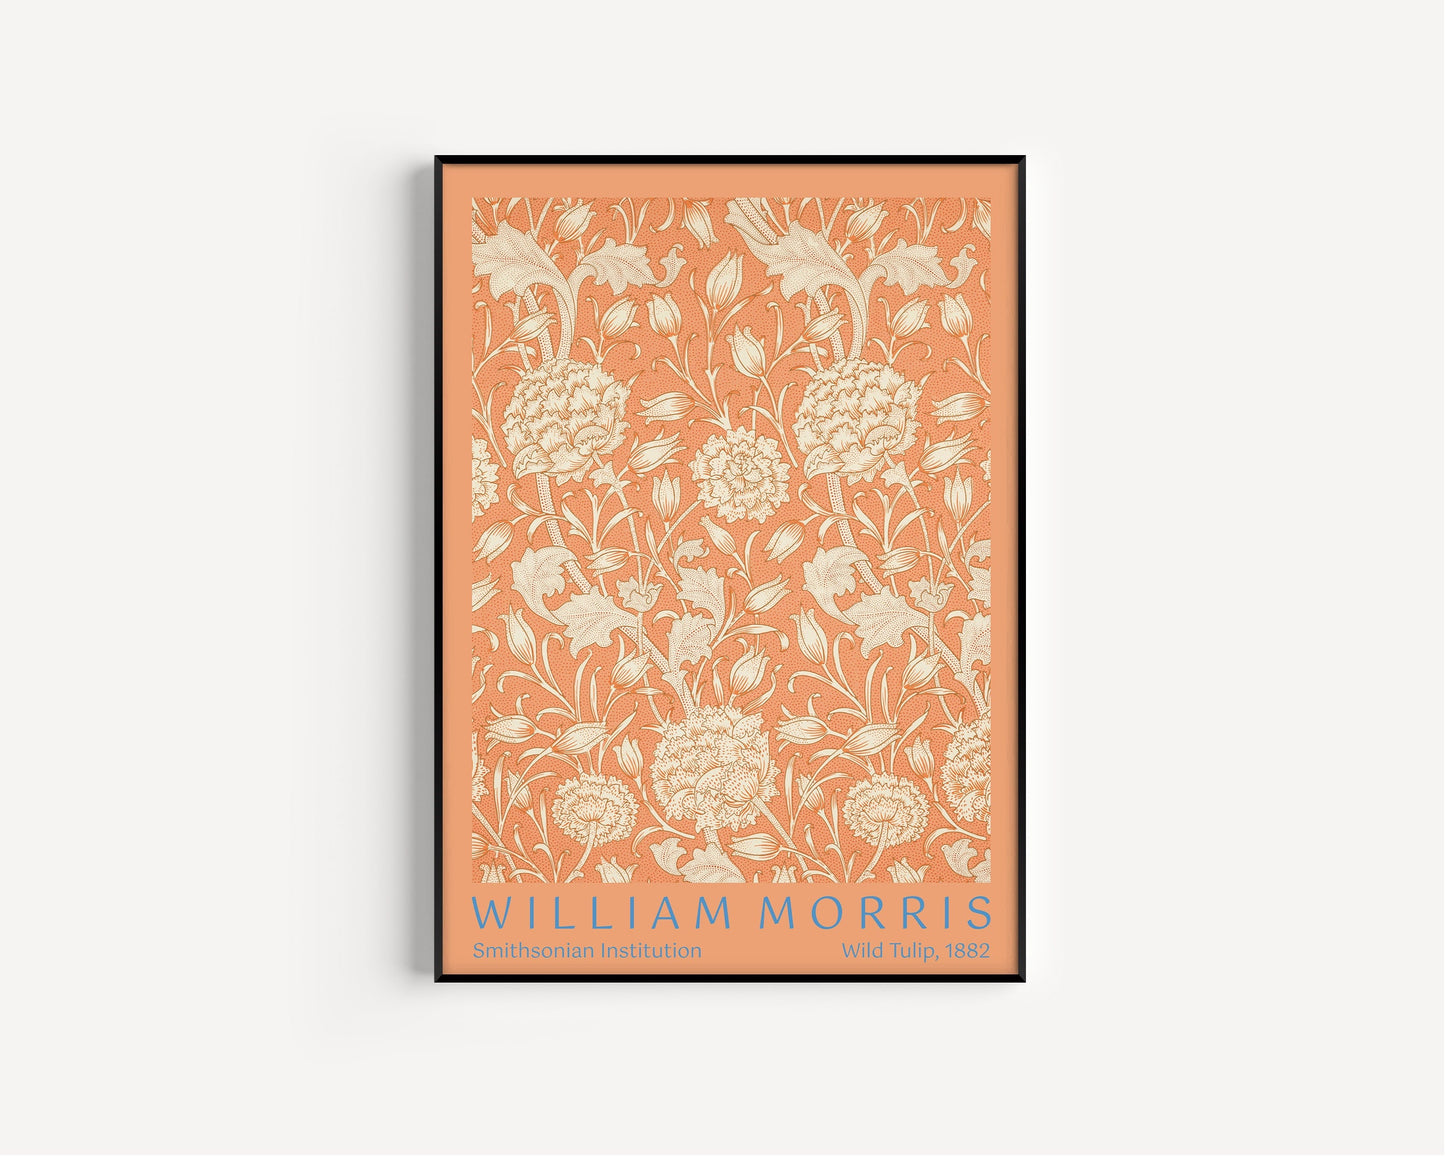 Framed William Morris Tulip Poster Wild Exhibition Poster Museum Art Print Nouveau Flower Pattern Market Museum Ready to hang Home Decor